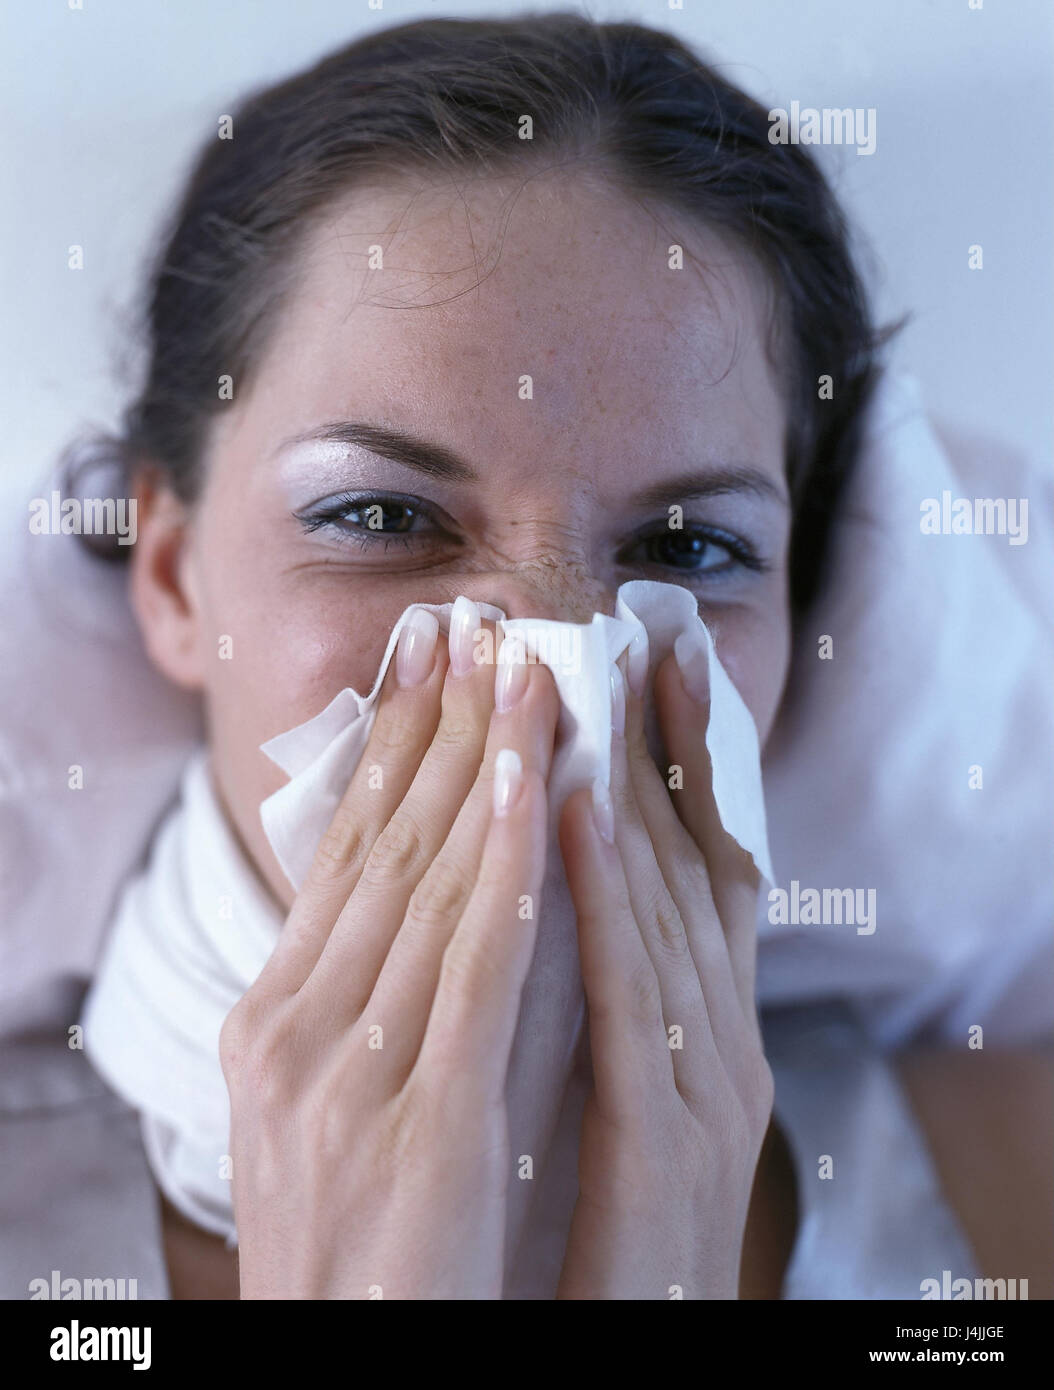 Bed, woman, ill, nose, clean disease, cold, coryza, hay fever, polling allergy, lie, catches cold, grip, to walrus moustaches, catches a chill, Verkühlung, illness, virus illness, Grippaler infection, paper tissue Stock Photo